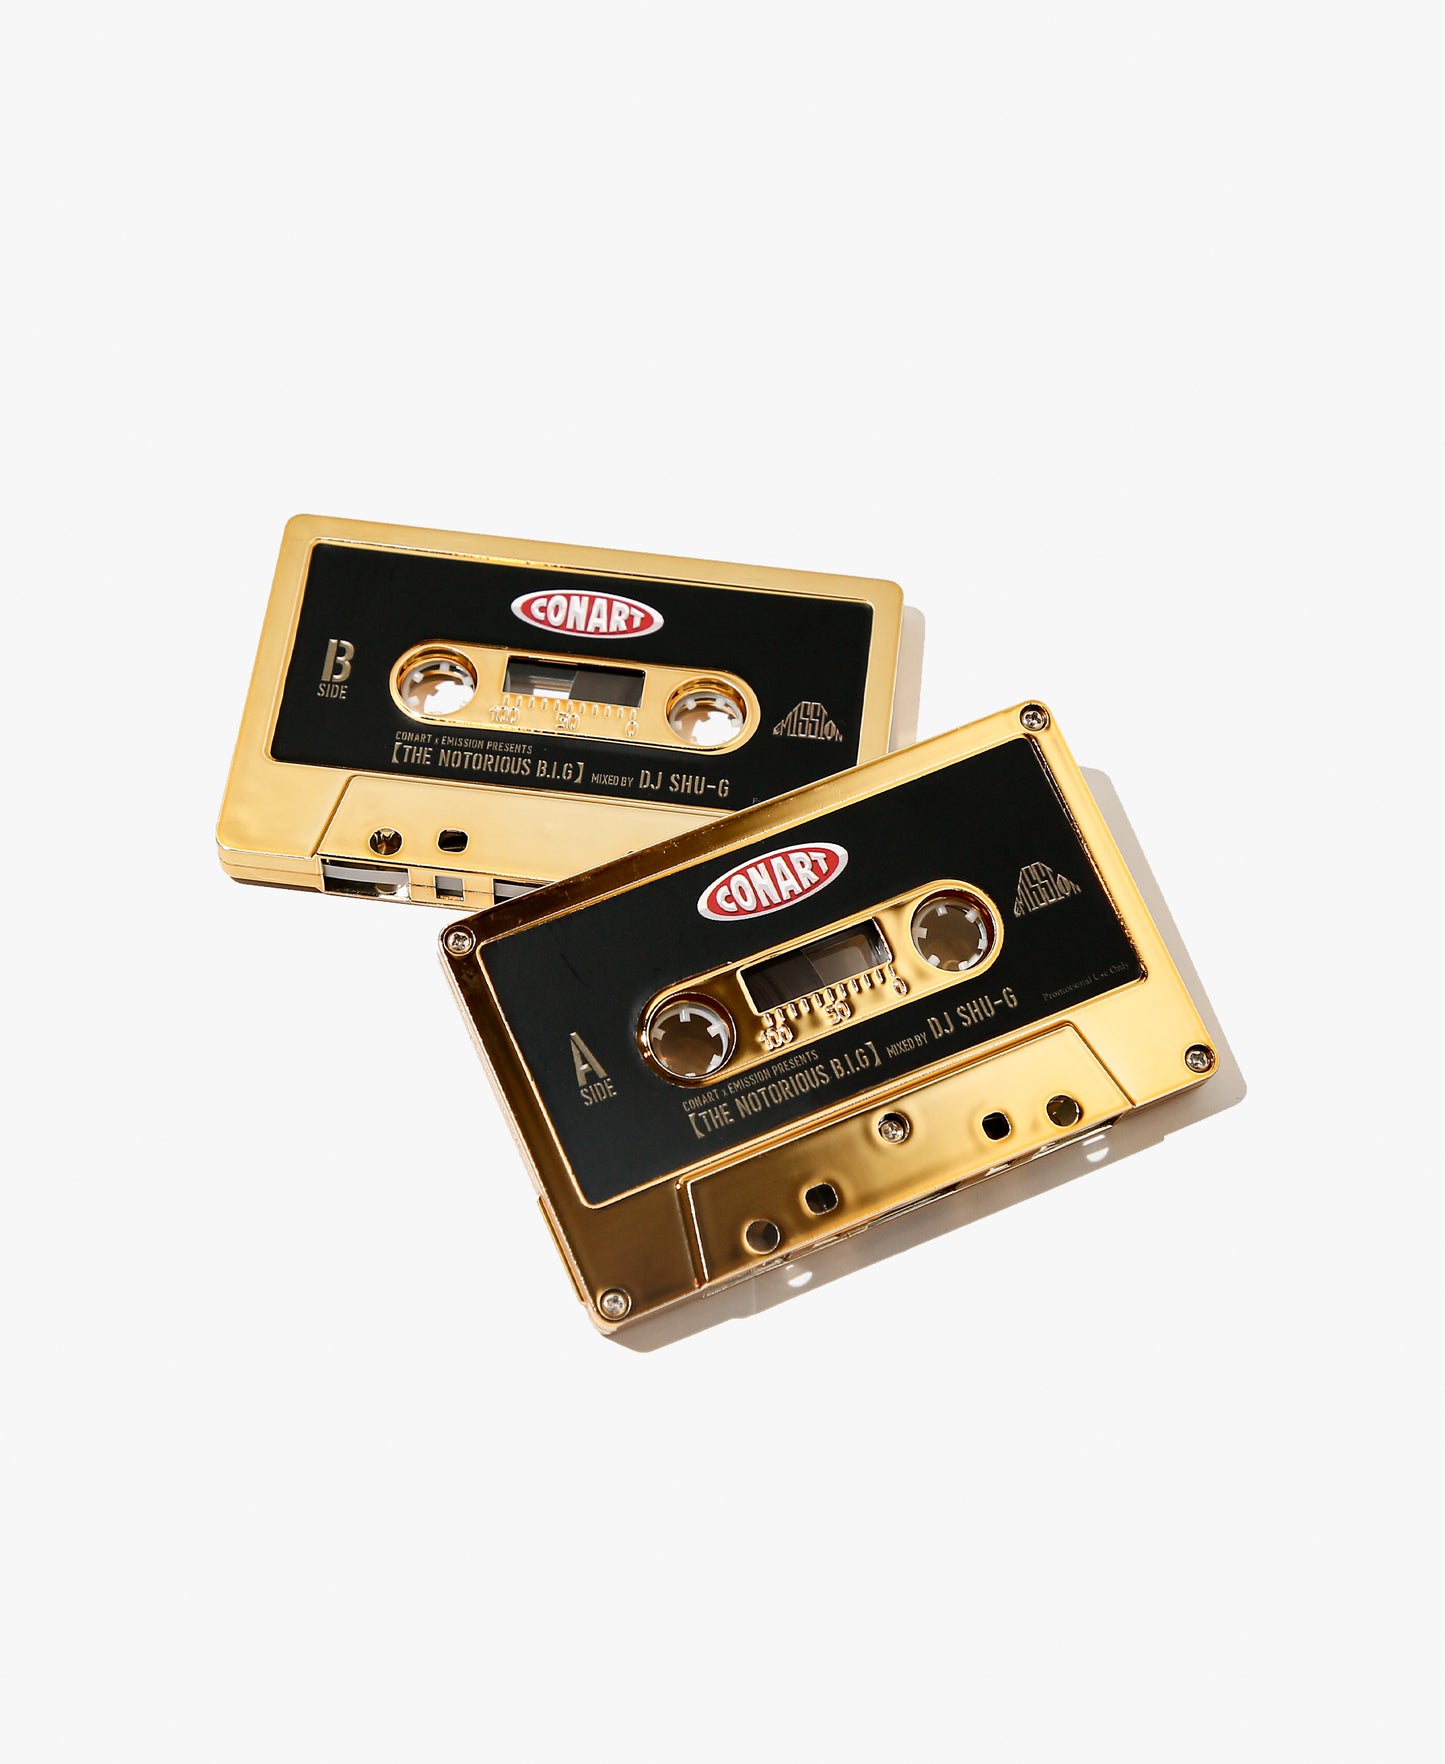 【CASSETTE TAPE】The Notorious B.I.G Mix